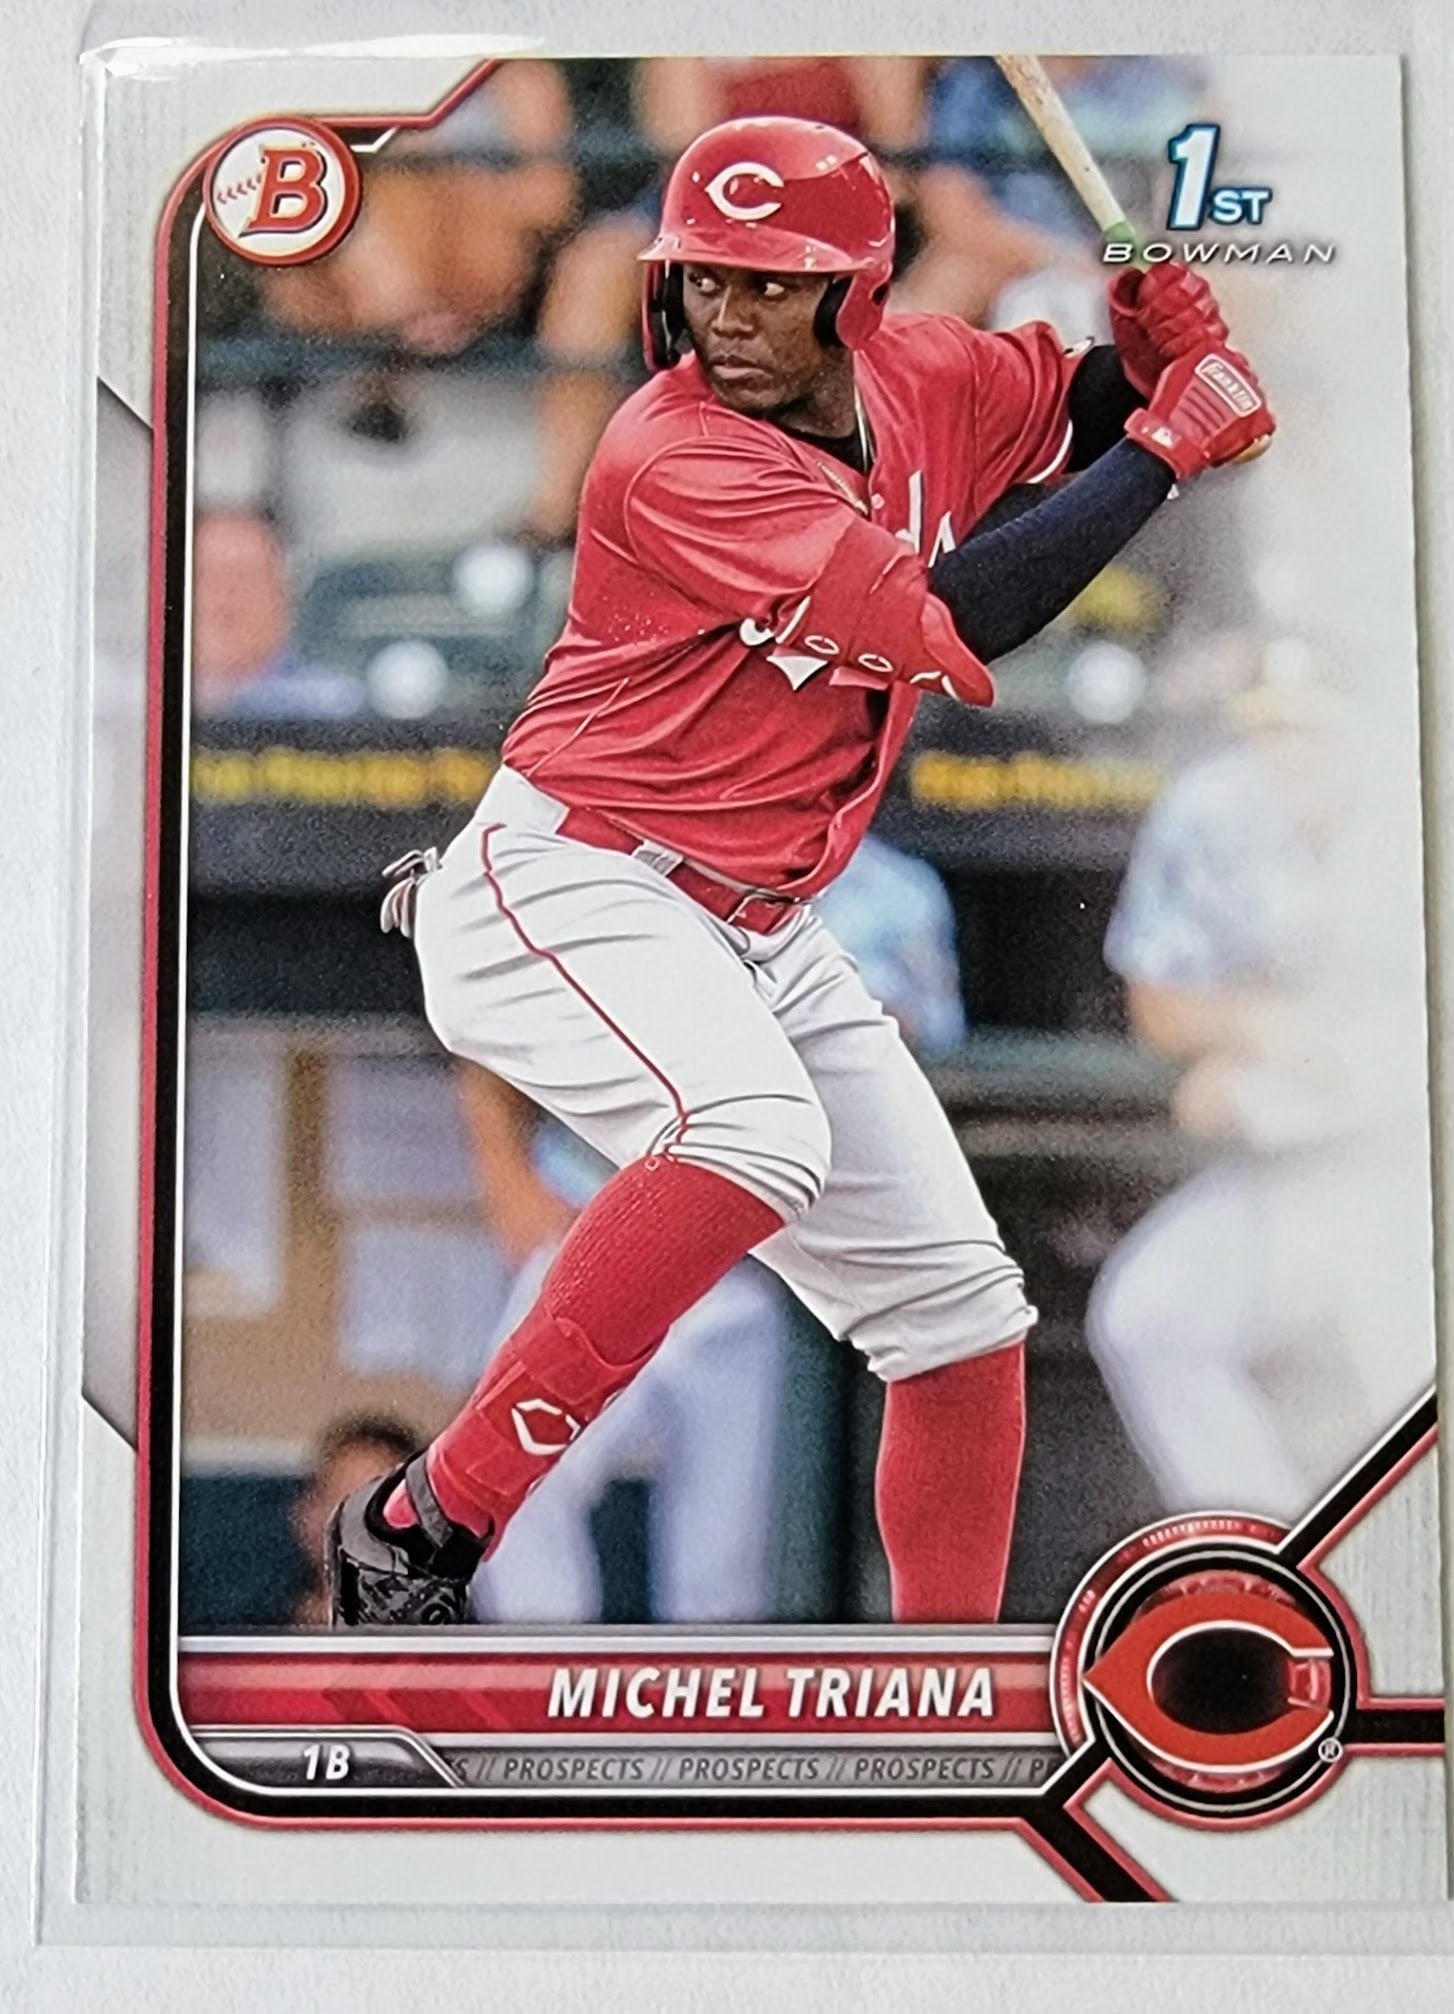 2022 Bowman Michel Triana 1st on Bowman Baseball Trading Card SMCB1 simple Xclusive Collectibles   